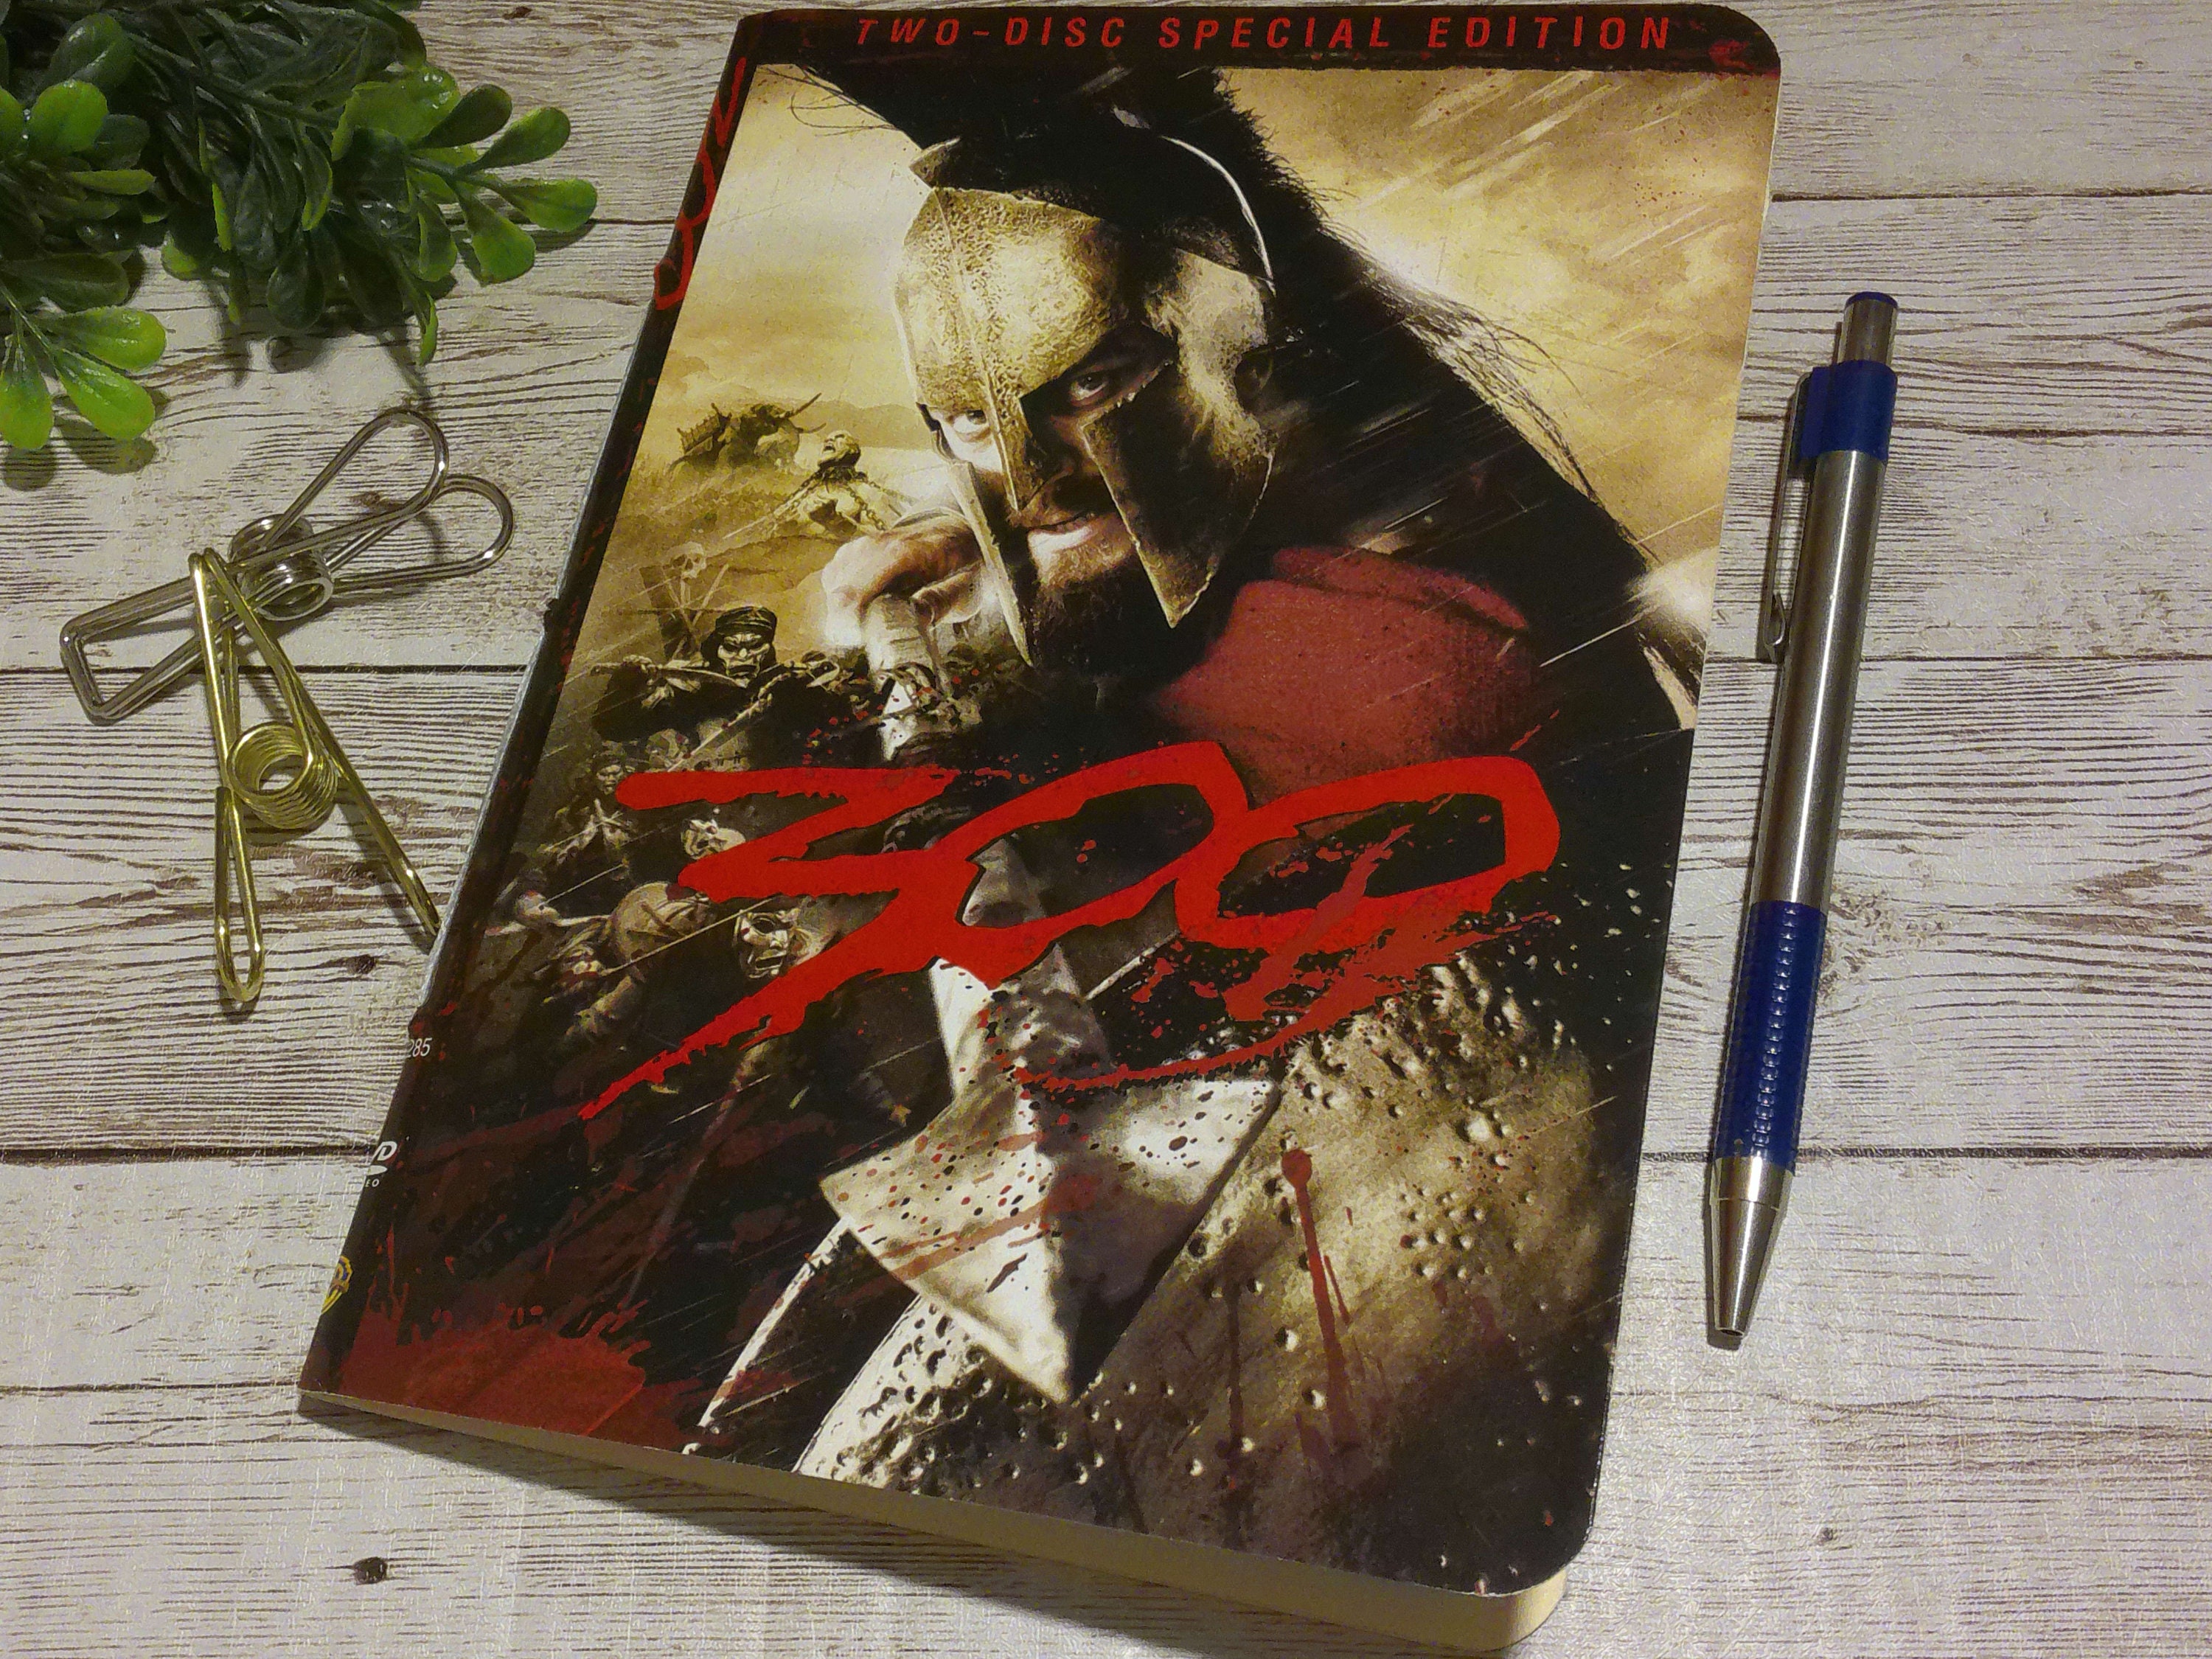 300 (Two-Disc Special Edition)